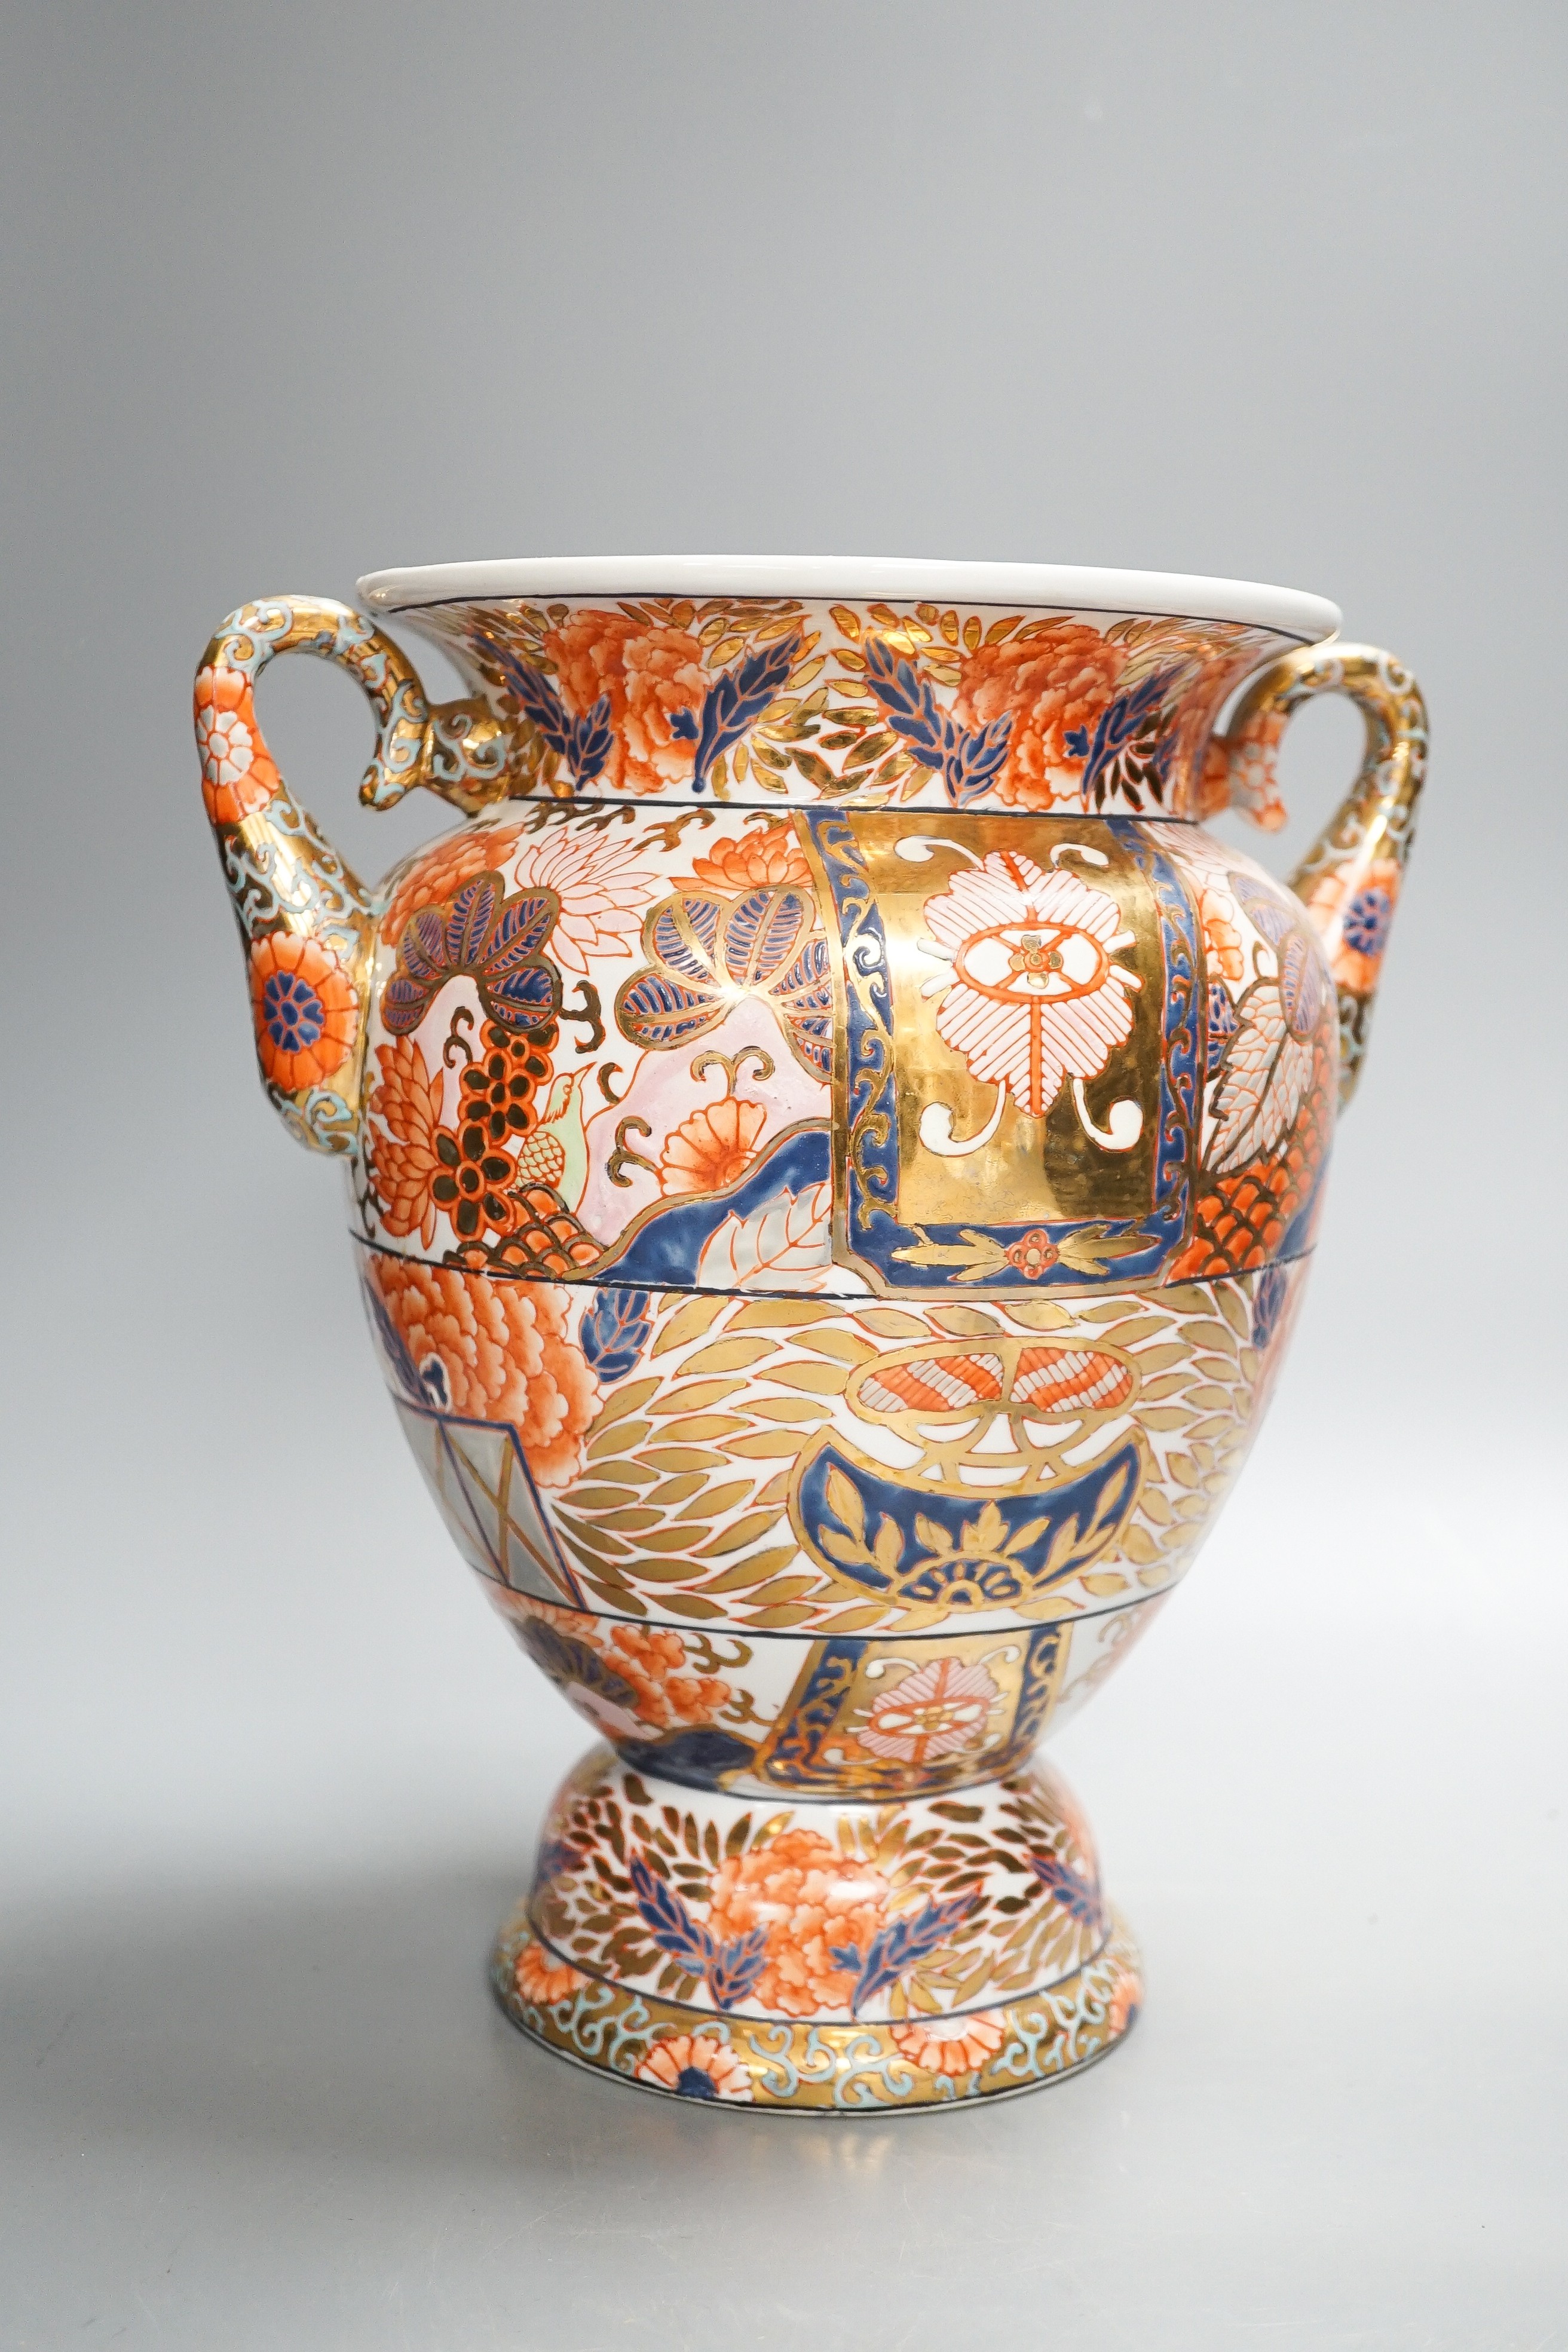 A twin handled Imari palette vase, a Japanese eggshell porcelain footed bowl, together with an 18th century Chinese porcelain bowl and saucer (with damage) 25cm (4)